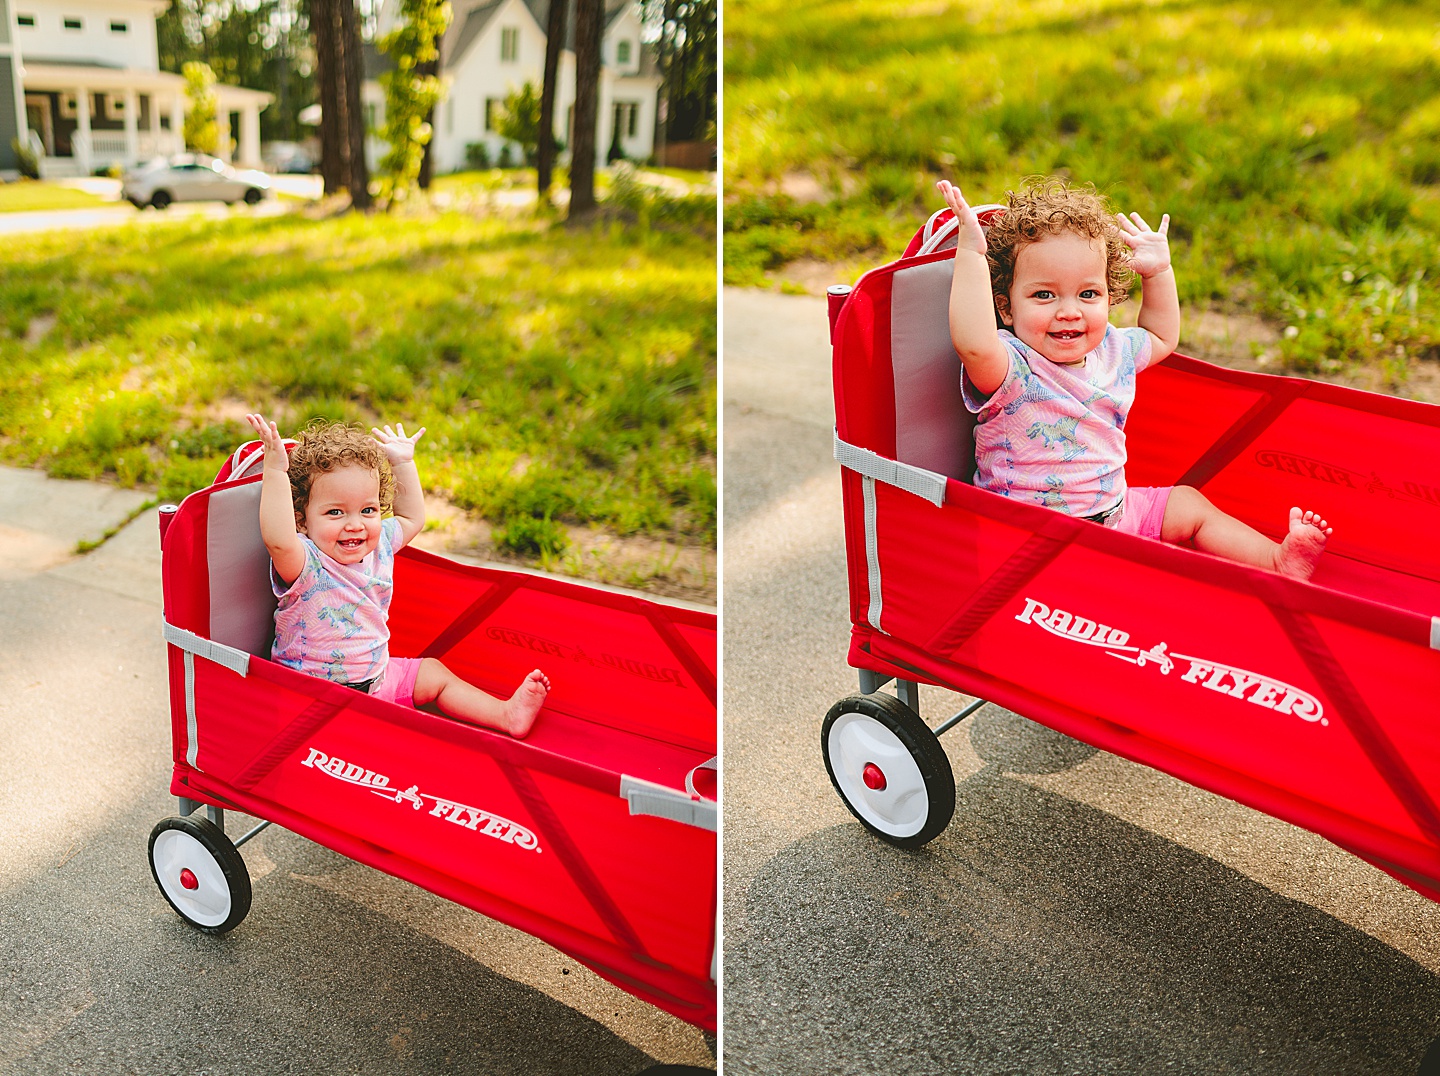 Baby riding in red wagon